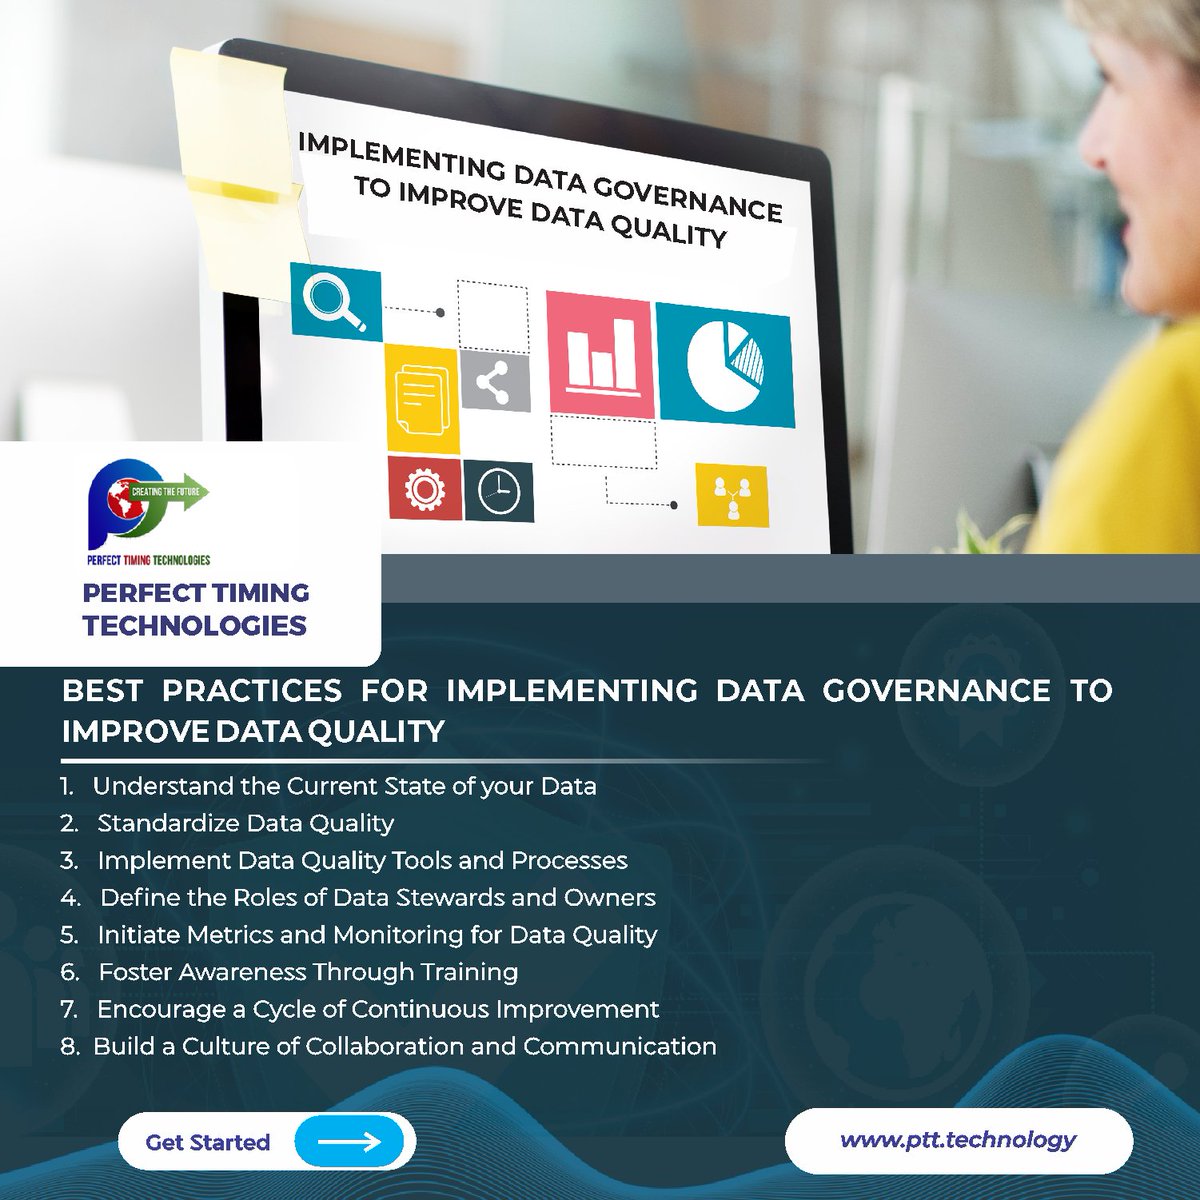 Best Practices for Implementing Data Governance to Improve Data Quality

Read the full article at analytics8.com/blog/how-to-im… 

#DataGovernance #DataQuality #DataManagement #DataImprovement #DataBestPractices #AnalyticsInsights #PerfectTimingTechnologies #PerfectTimingHolding